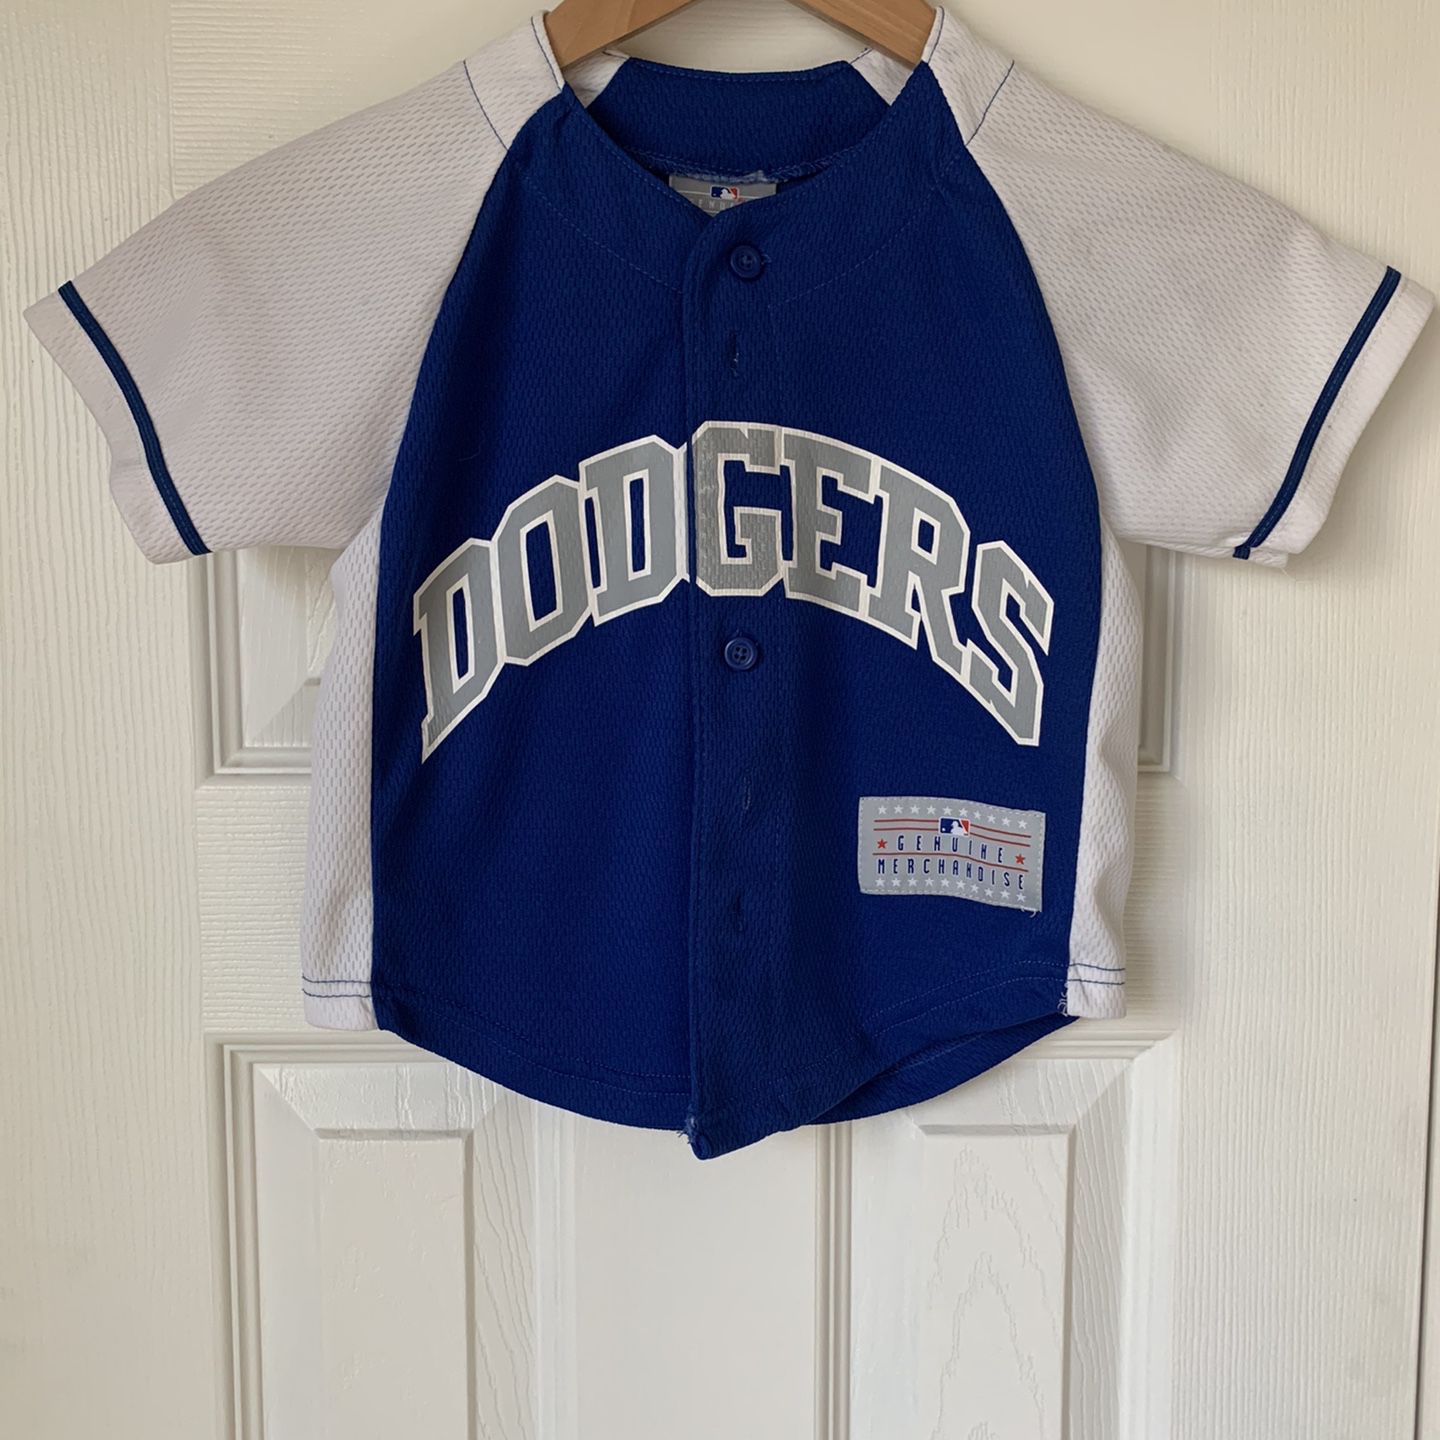 Toddler Dodgers Jersey for Sale in Cypress, CA - OfferUp